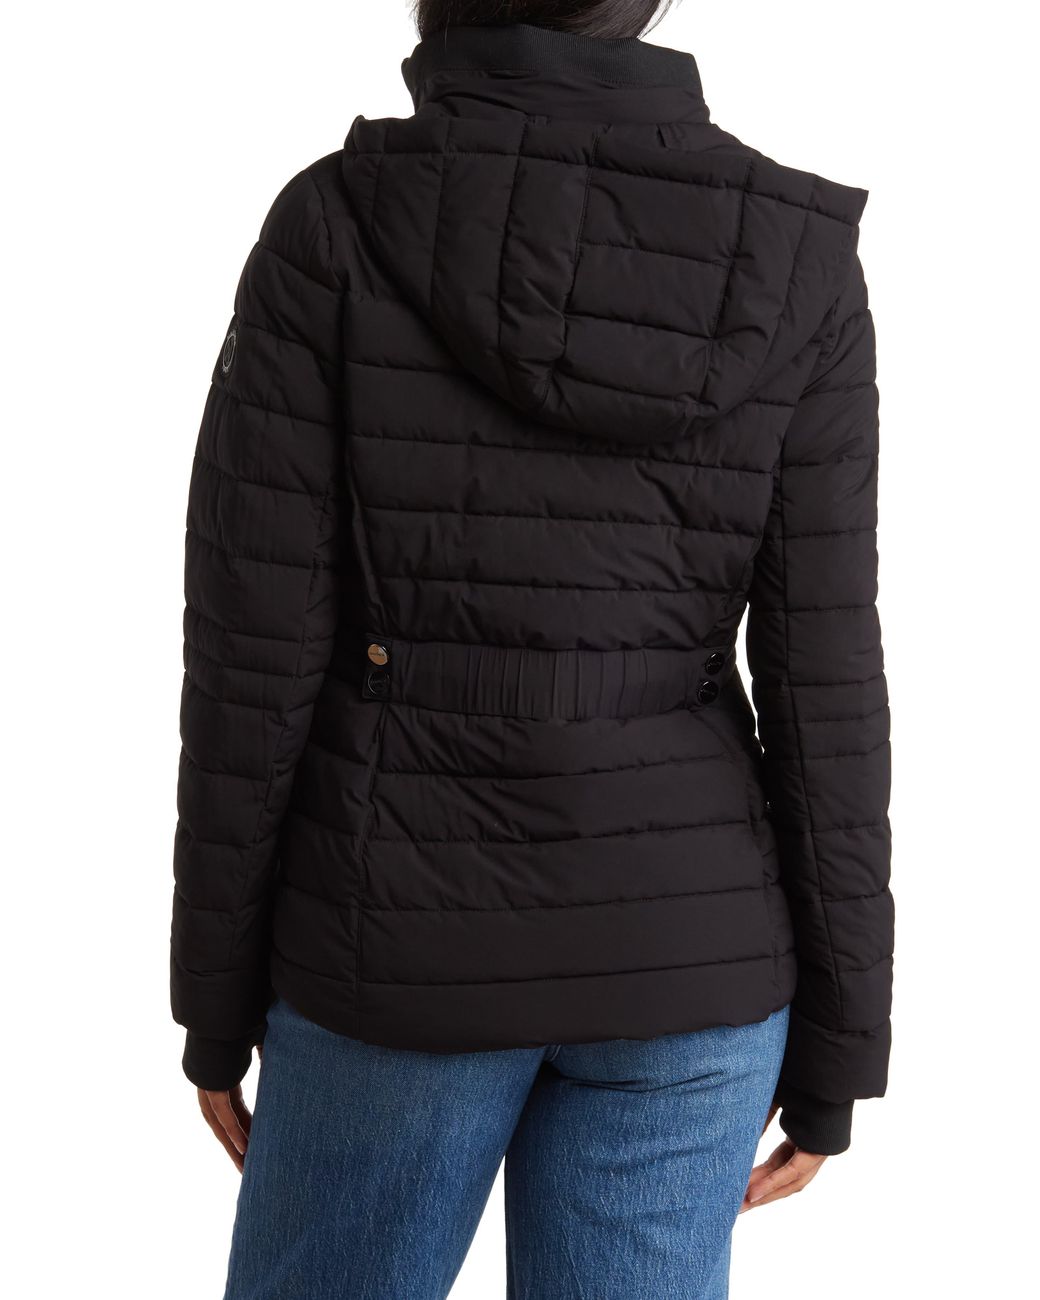 Nautica Women's 3/4 Stretch Puffer Jacket with Fur Hood and Half